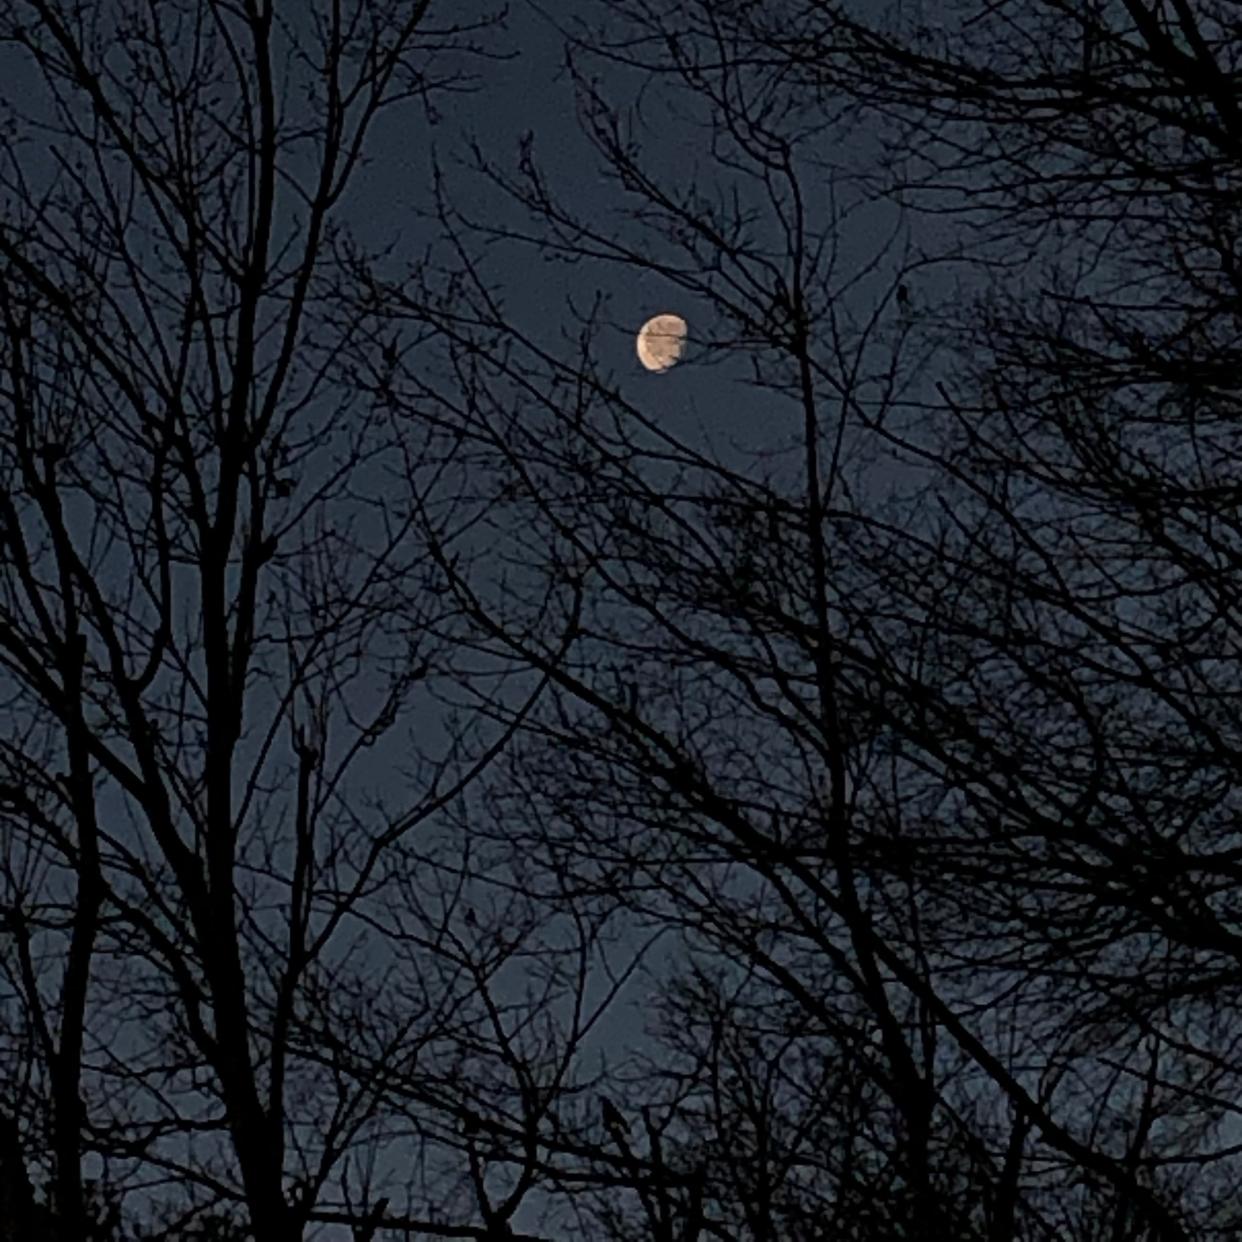 The moon setting on the morning of Feb. 10, 2023 at 7:18 a.m. Ten days later, the sun is rising well before 7 a.m., but after daylight saving time starts on March 12, the sun won't rise until 7:24 a.m.